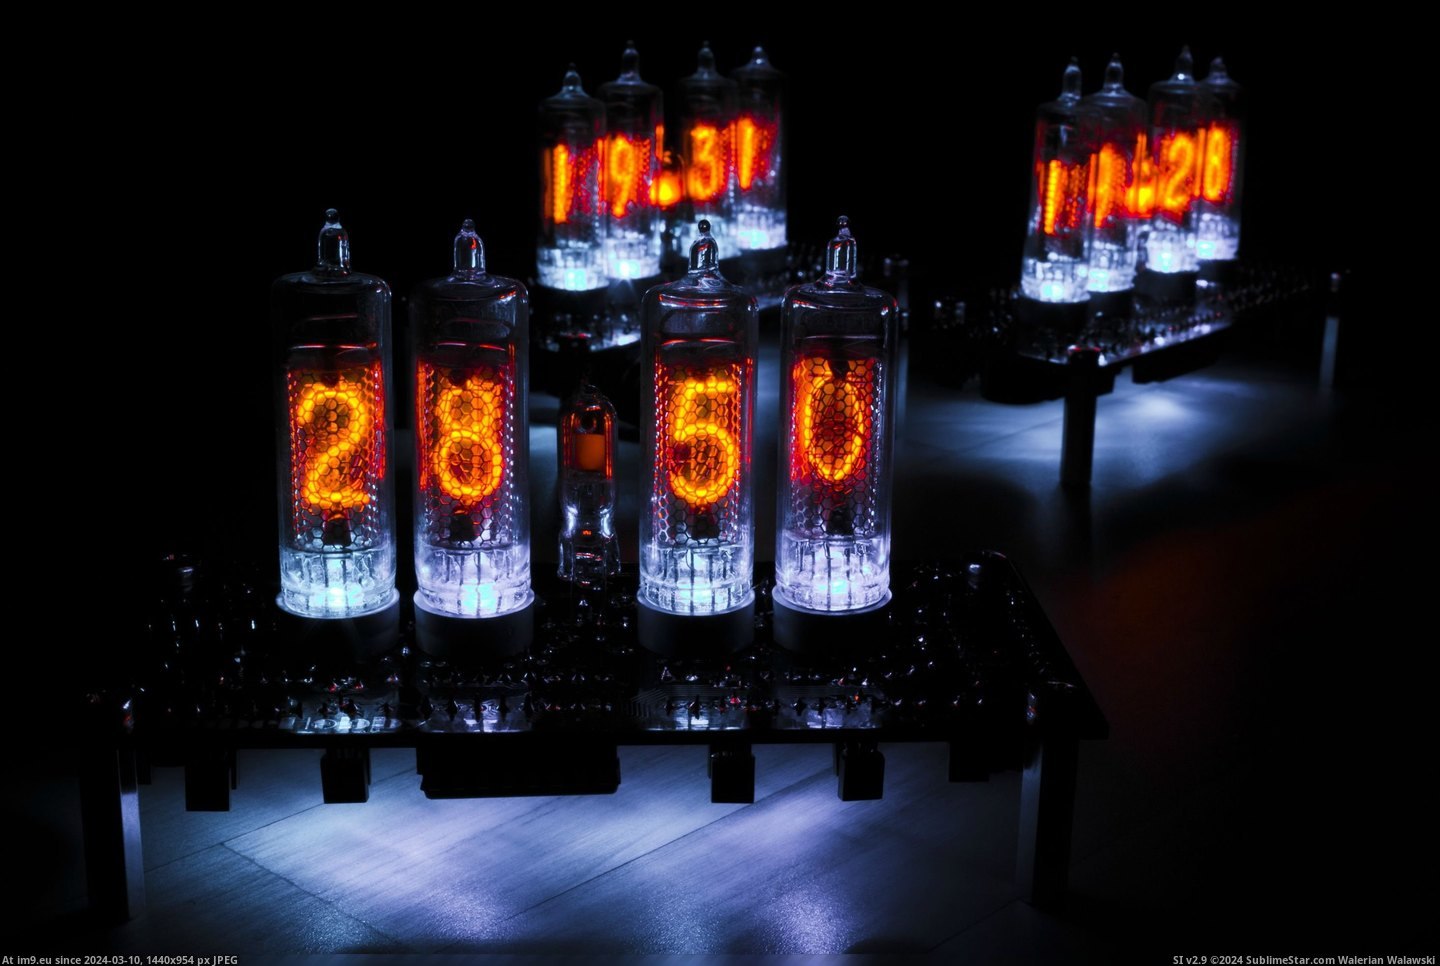 #Built #Project #Nixie #Coolest #Electronics #Possibly #Tube #Clock [Pics] Just built a Nixie Tube clock. Quite possibly the coolest electronics project I've done to date. Pic. (Изображение из альбом My r/PICS favs))